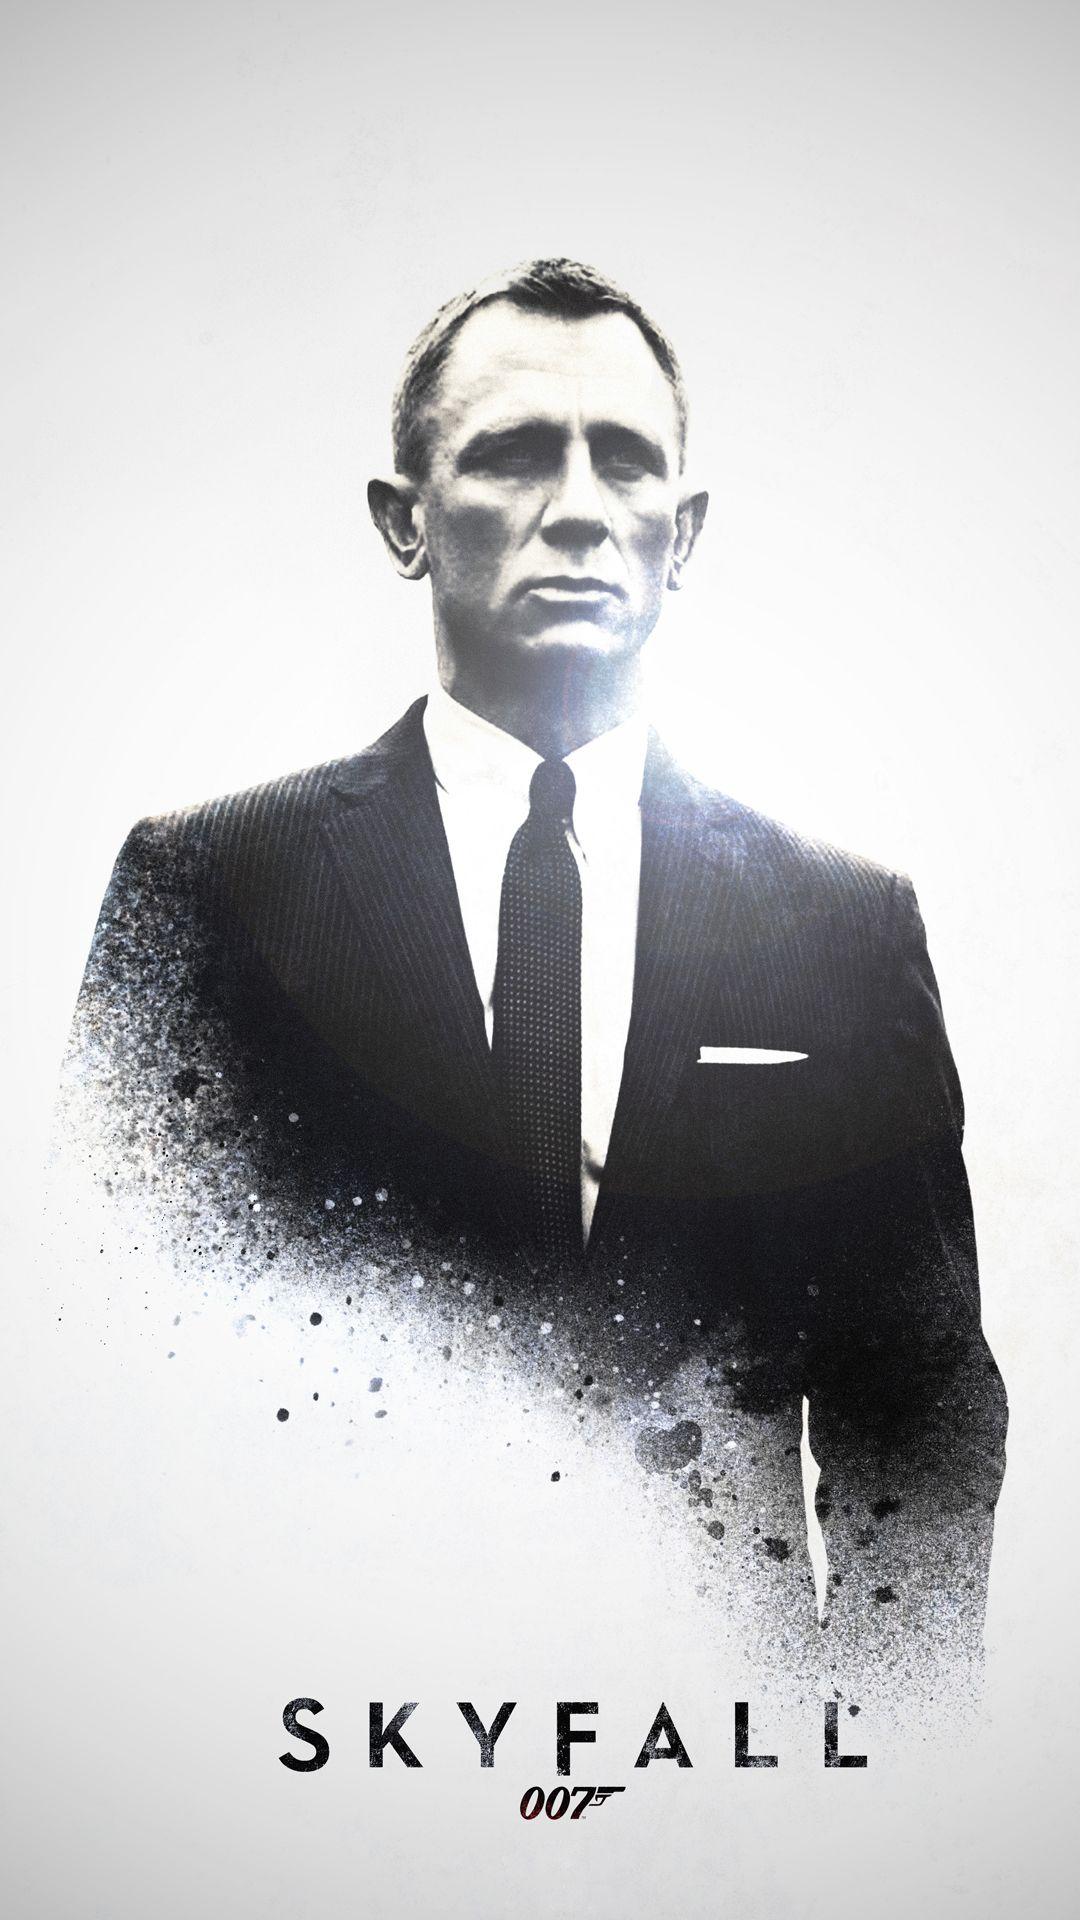 Skyfall James Bond 007 htc one wallpaper, free and easy to